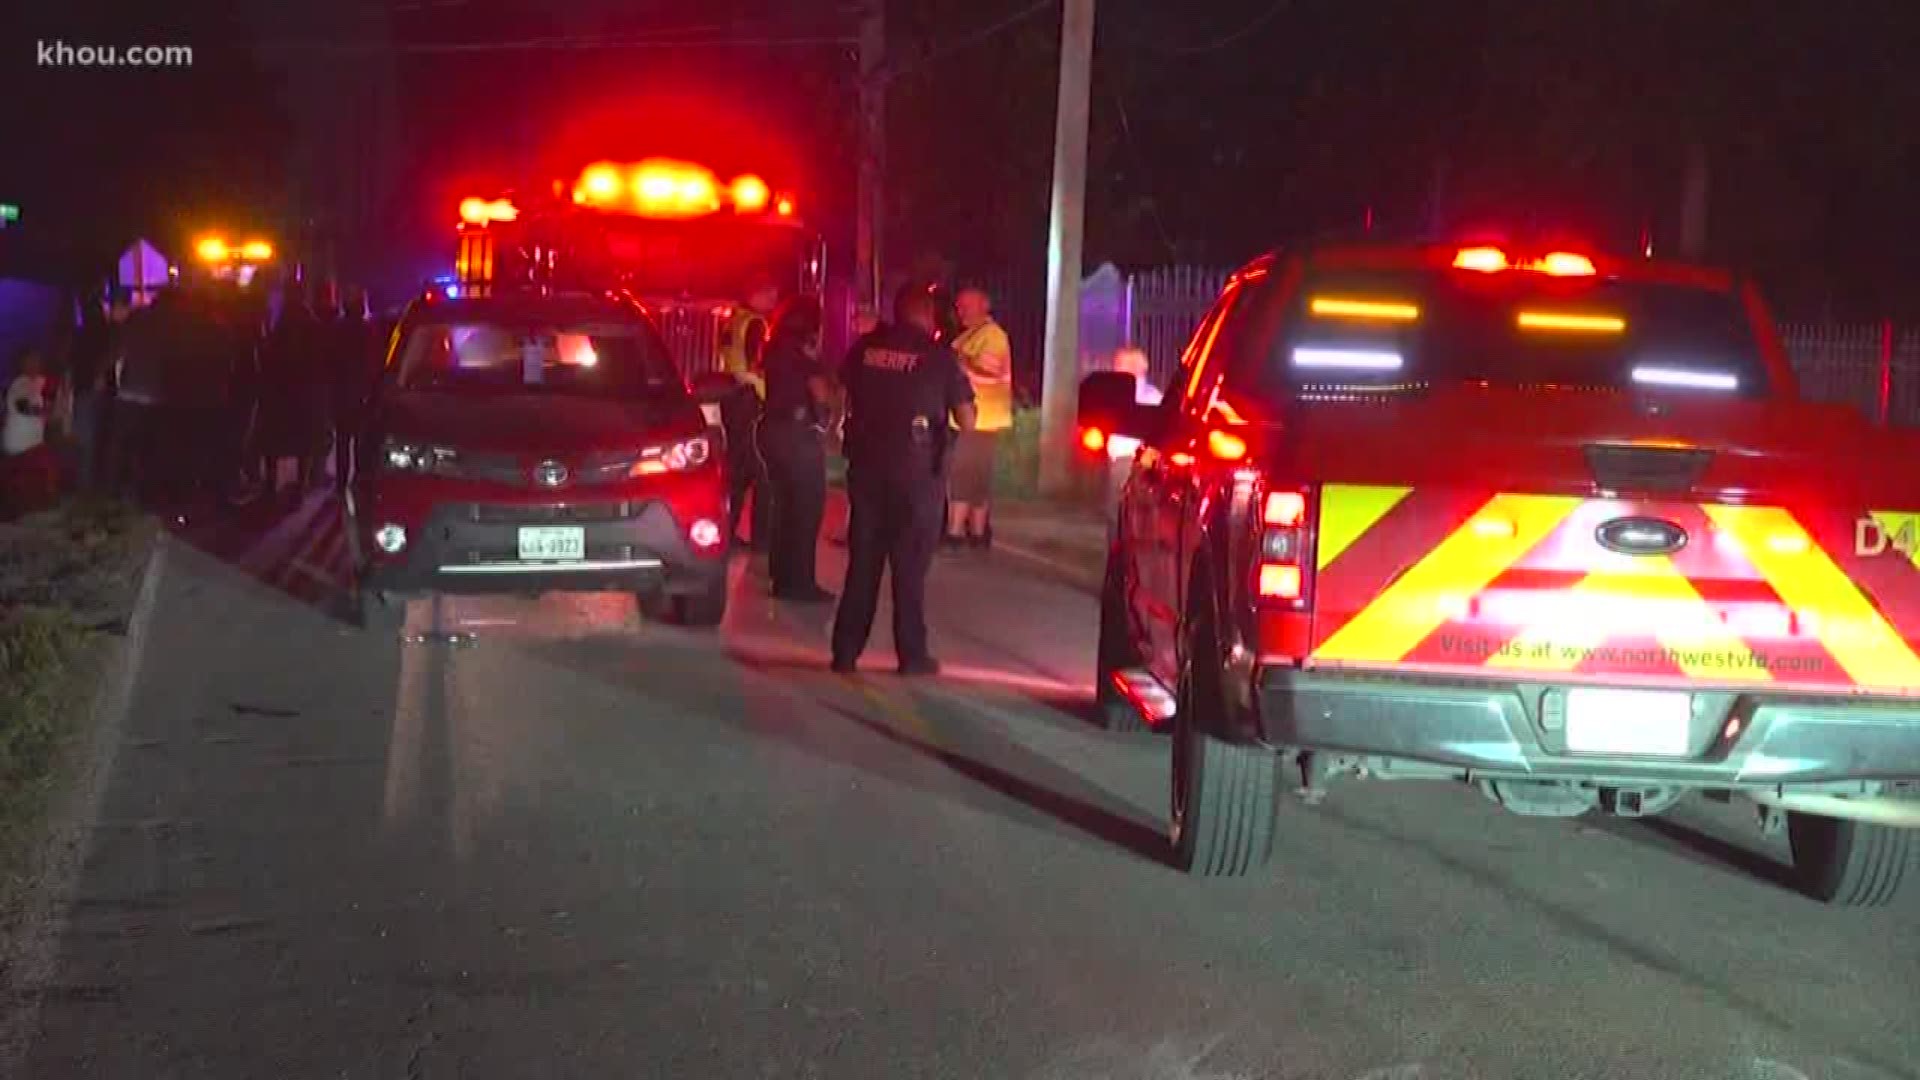 A teen was injured Sunday night after a pickup truck driver allegedly hit a horse the teen was riding in northwest Harris County.